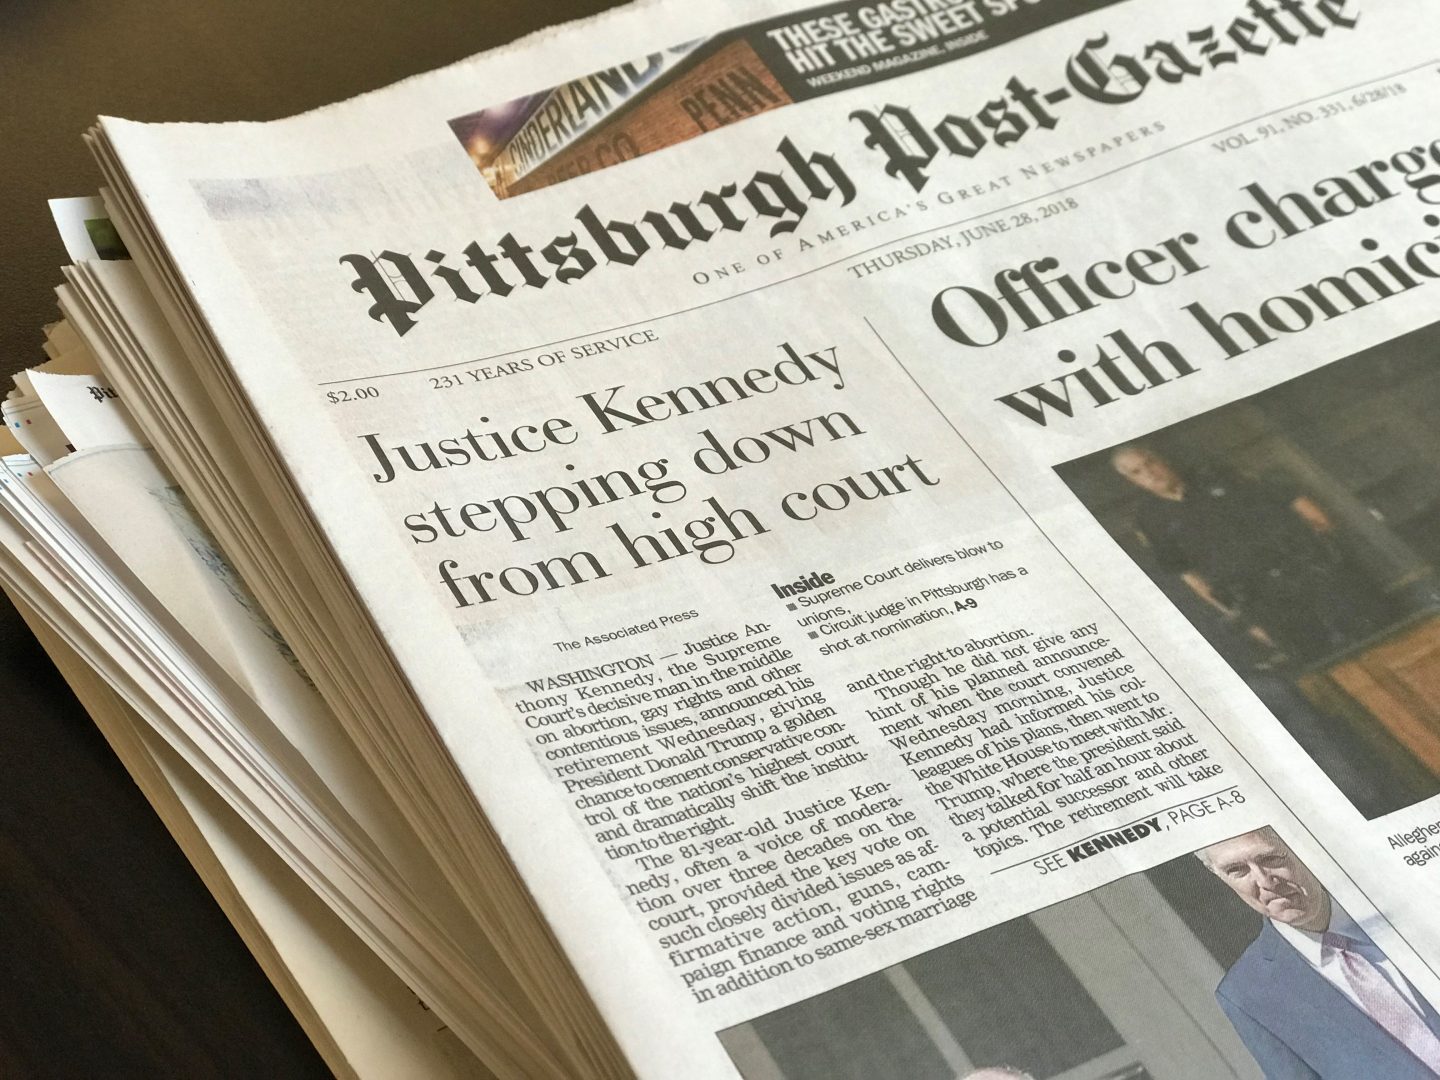 An edition of the Pittsburgh Post-Gazette newspaper.